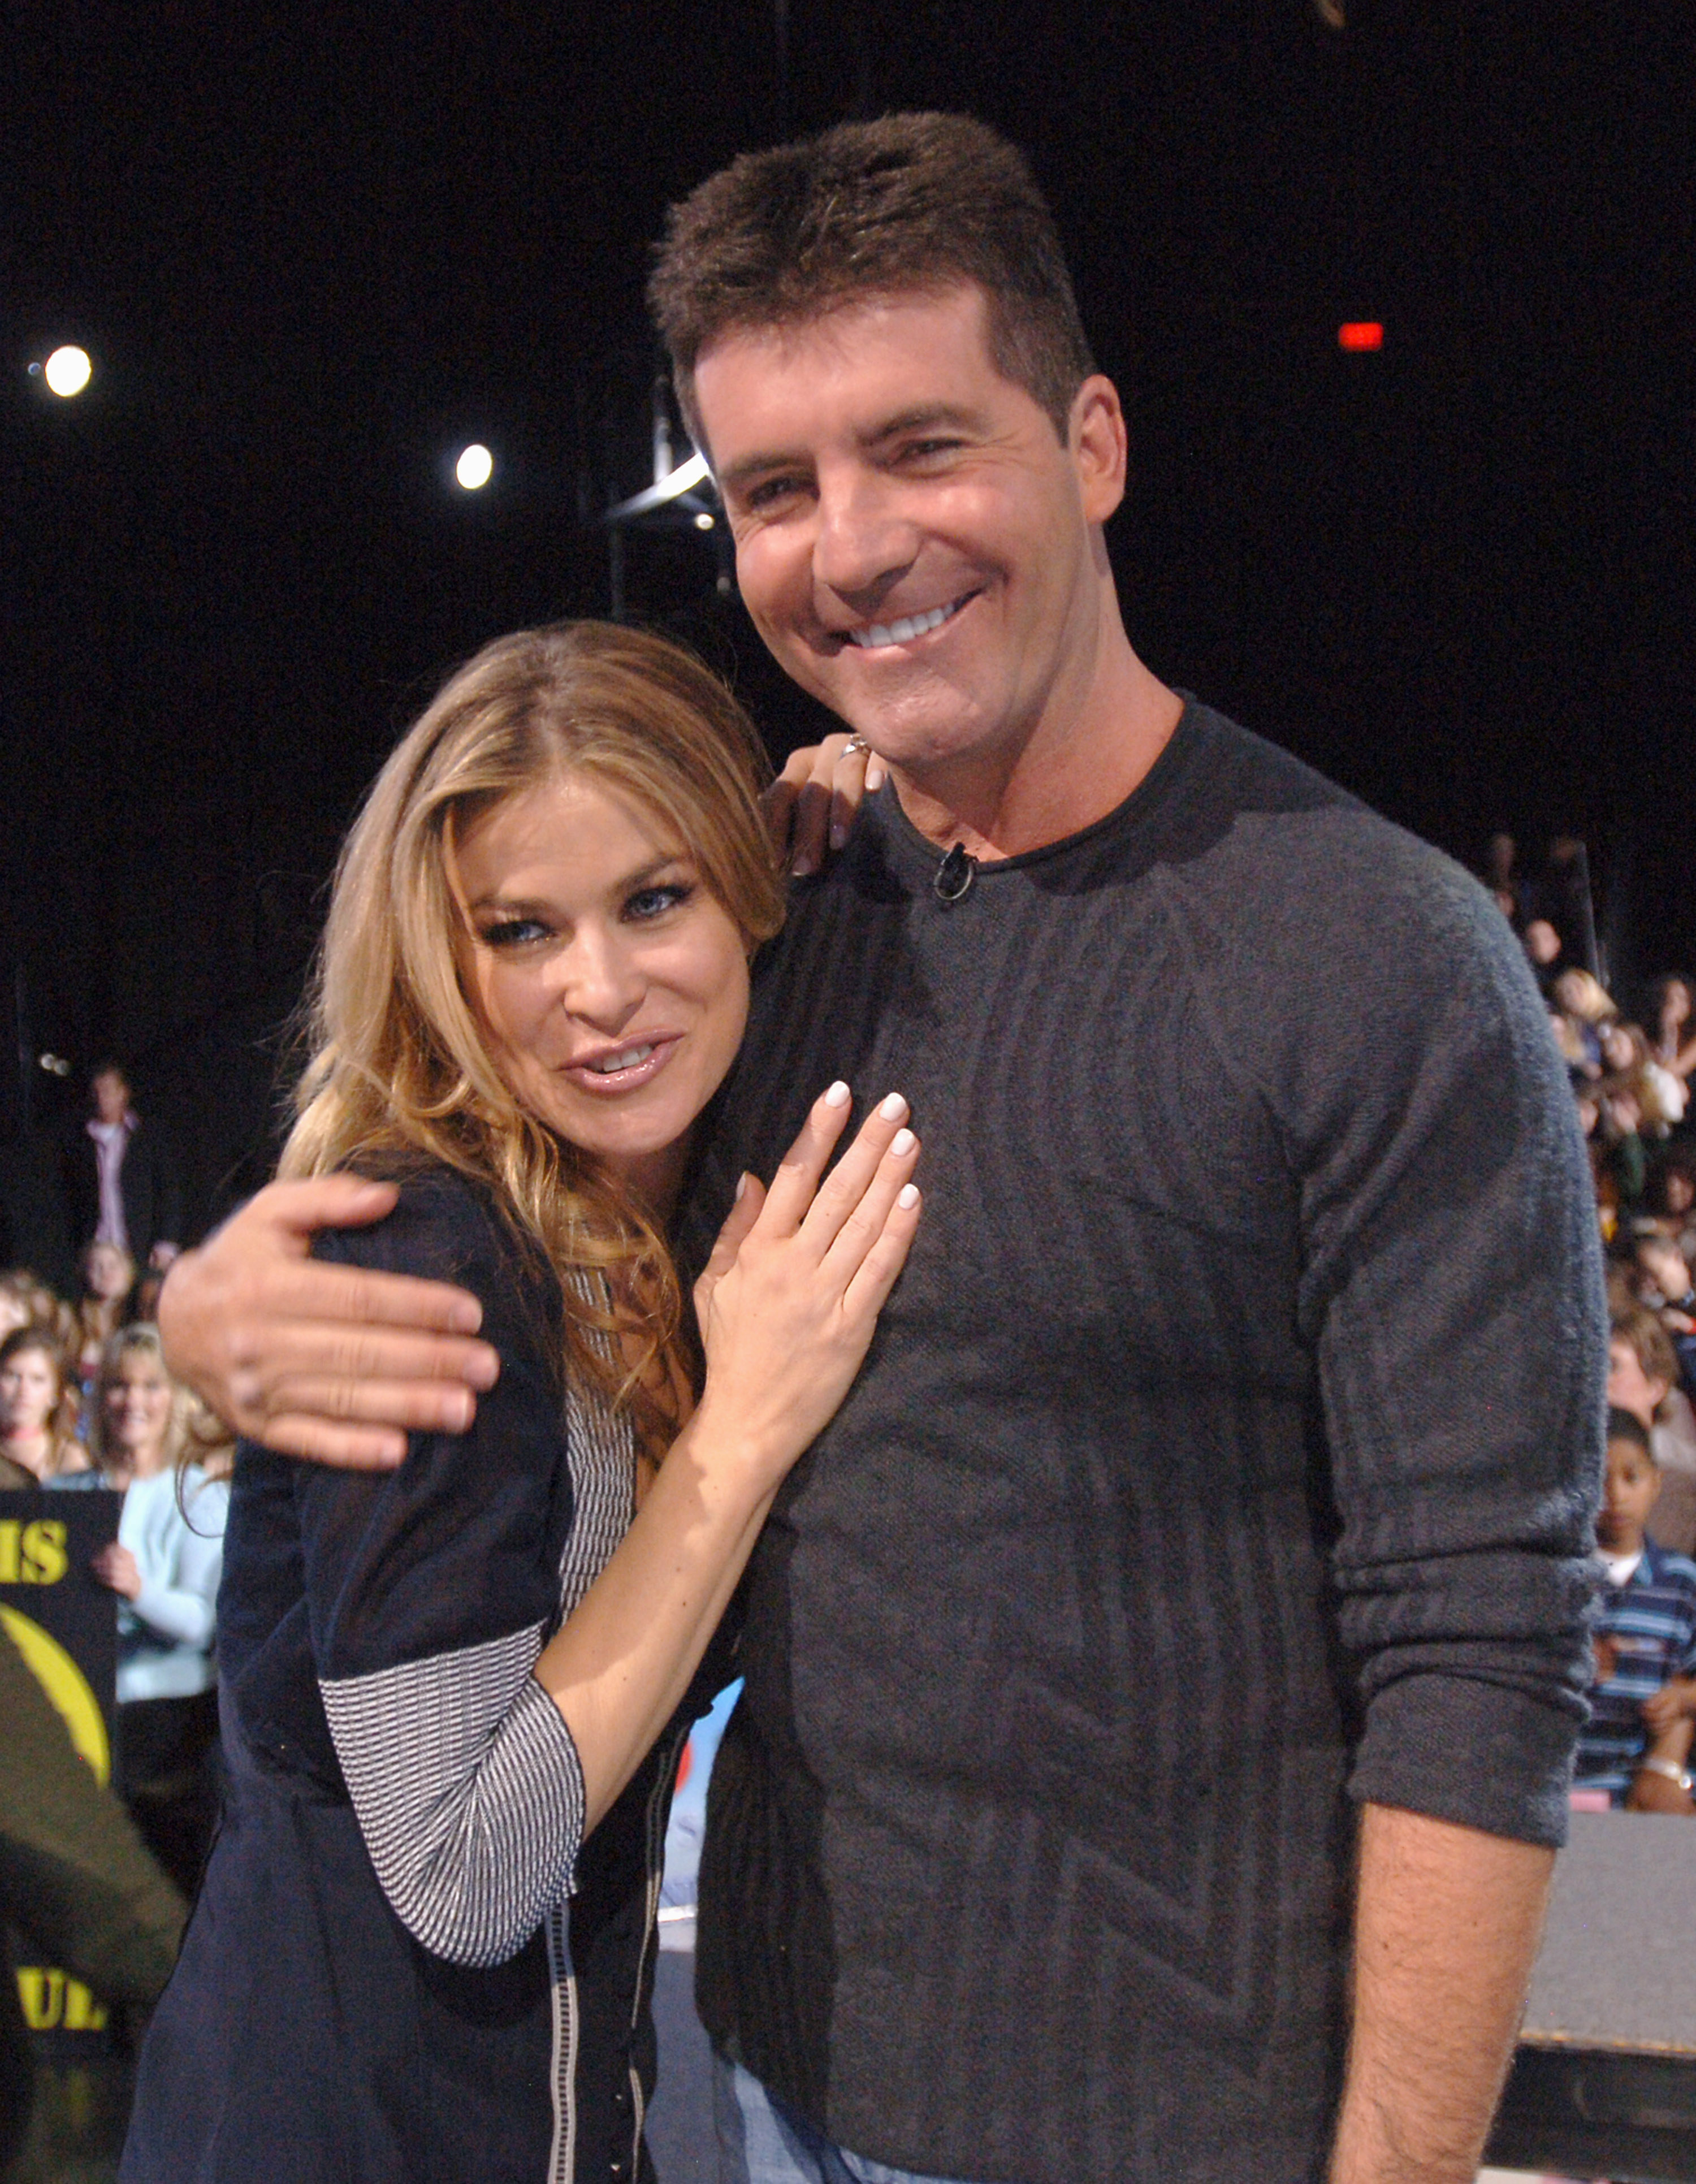 Carmen Electra and Simon Cowell cuddling while standing in front of the Idol audience